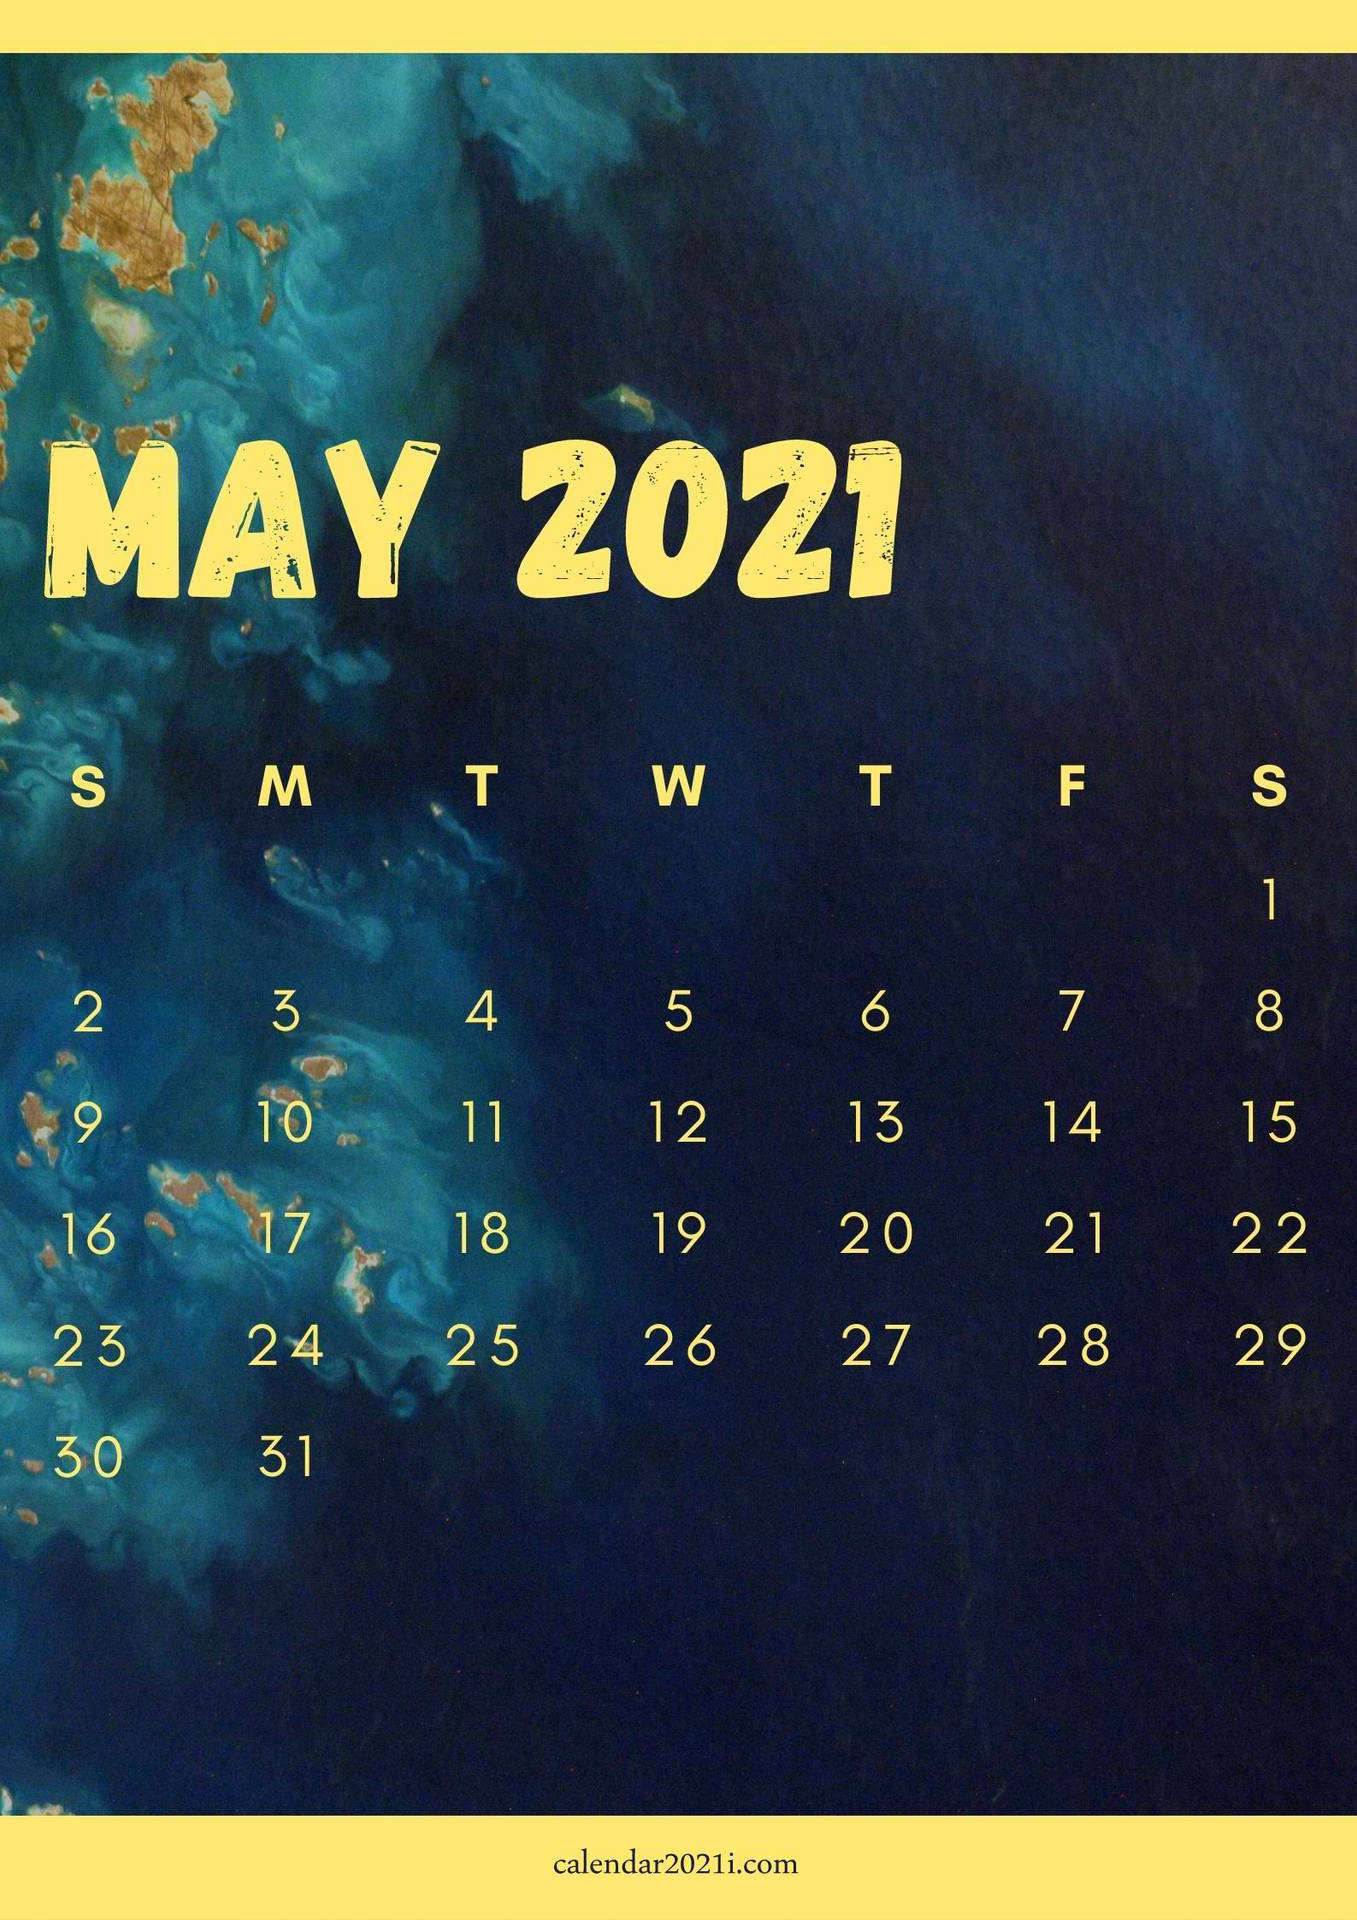 Celebrate The Changing Of Springtime Into Summertime With The World Map Painting Of May 2021. Background